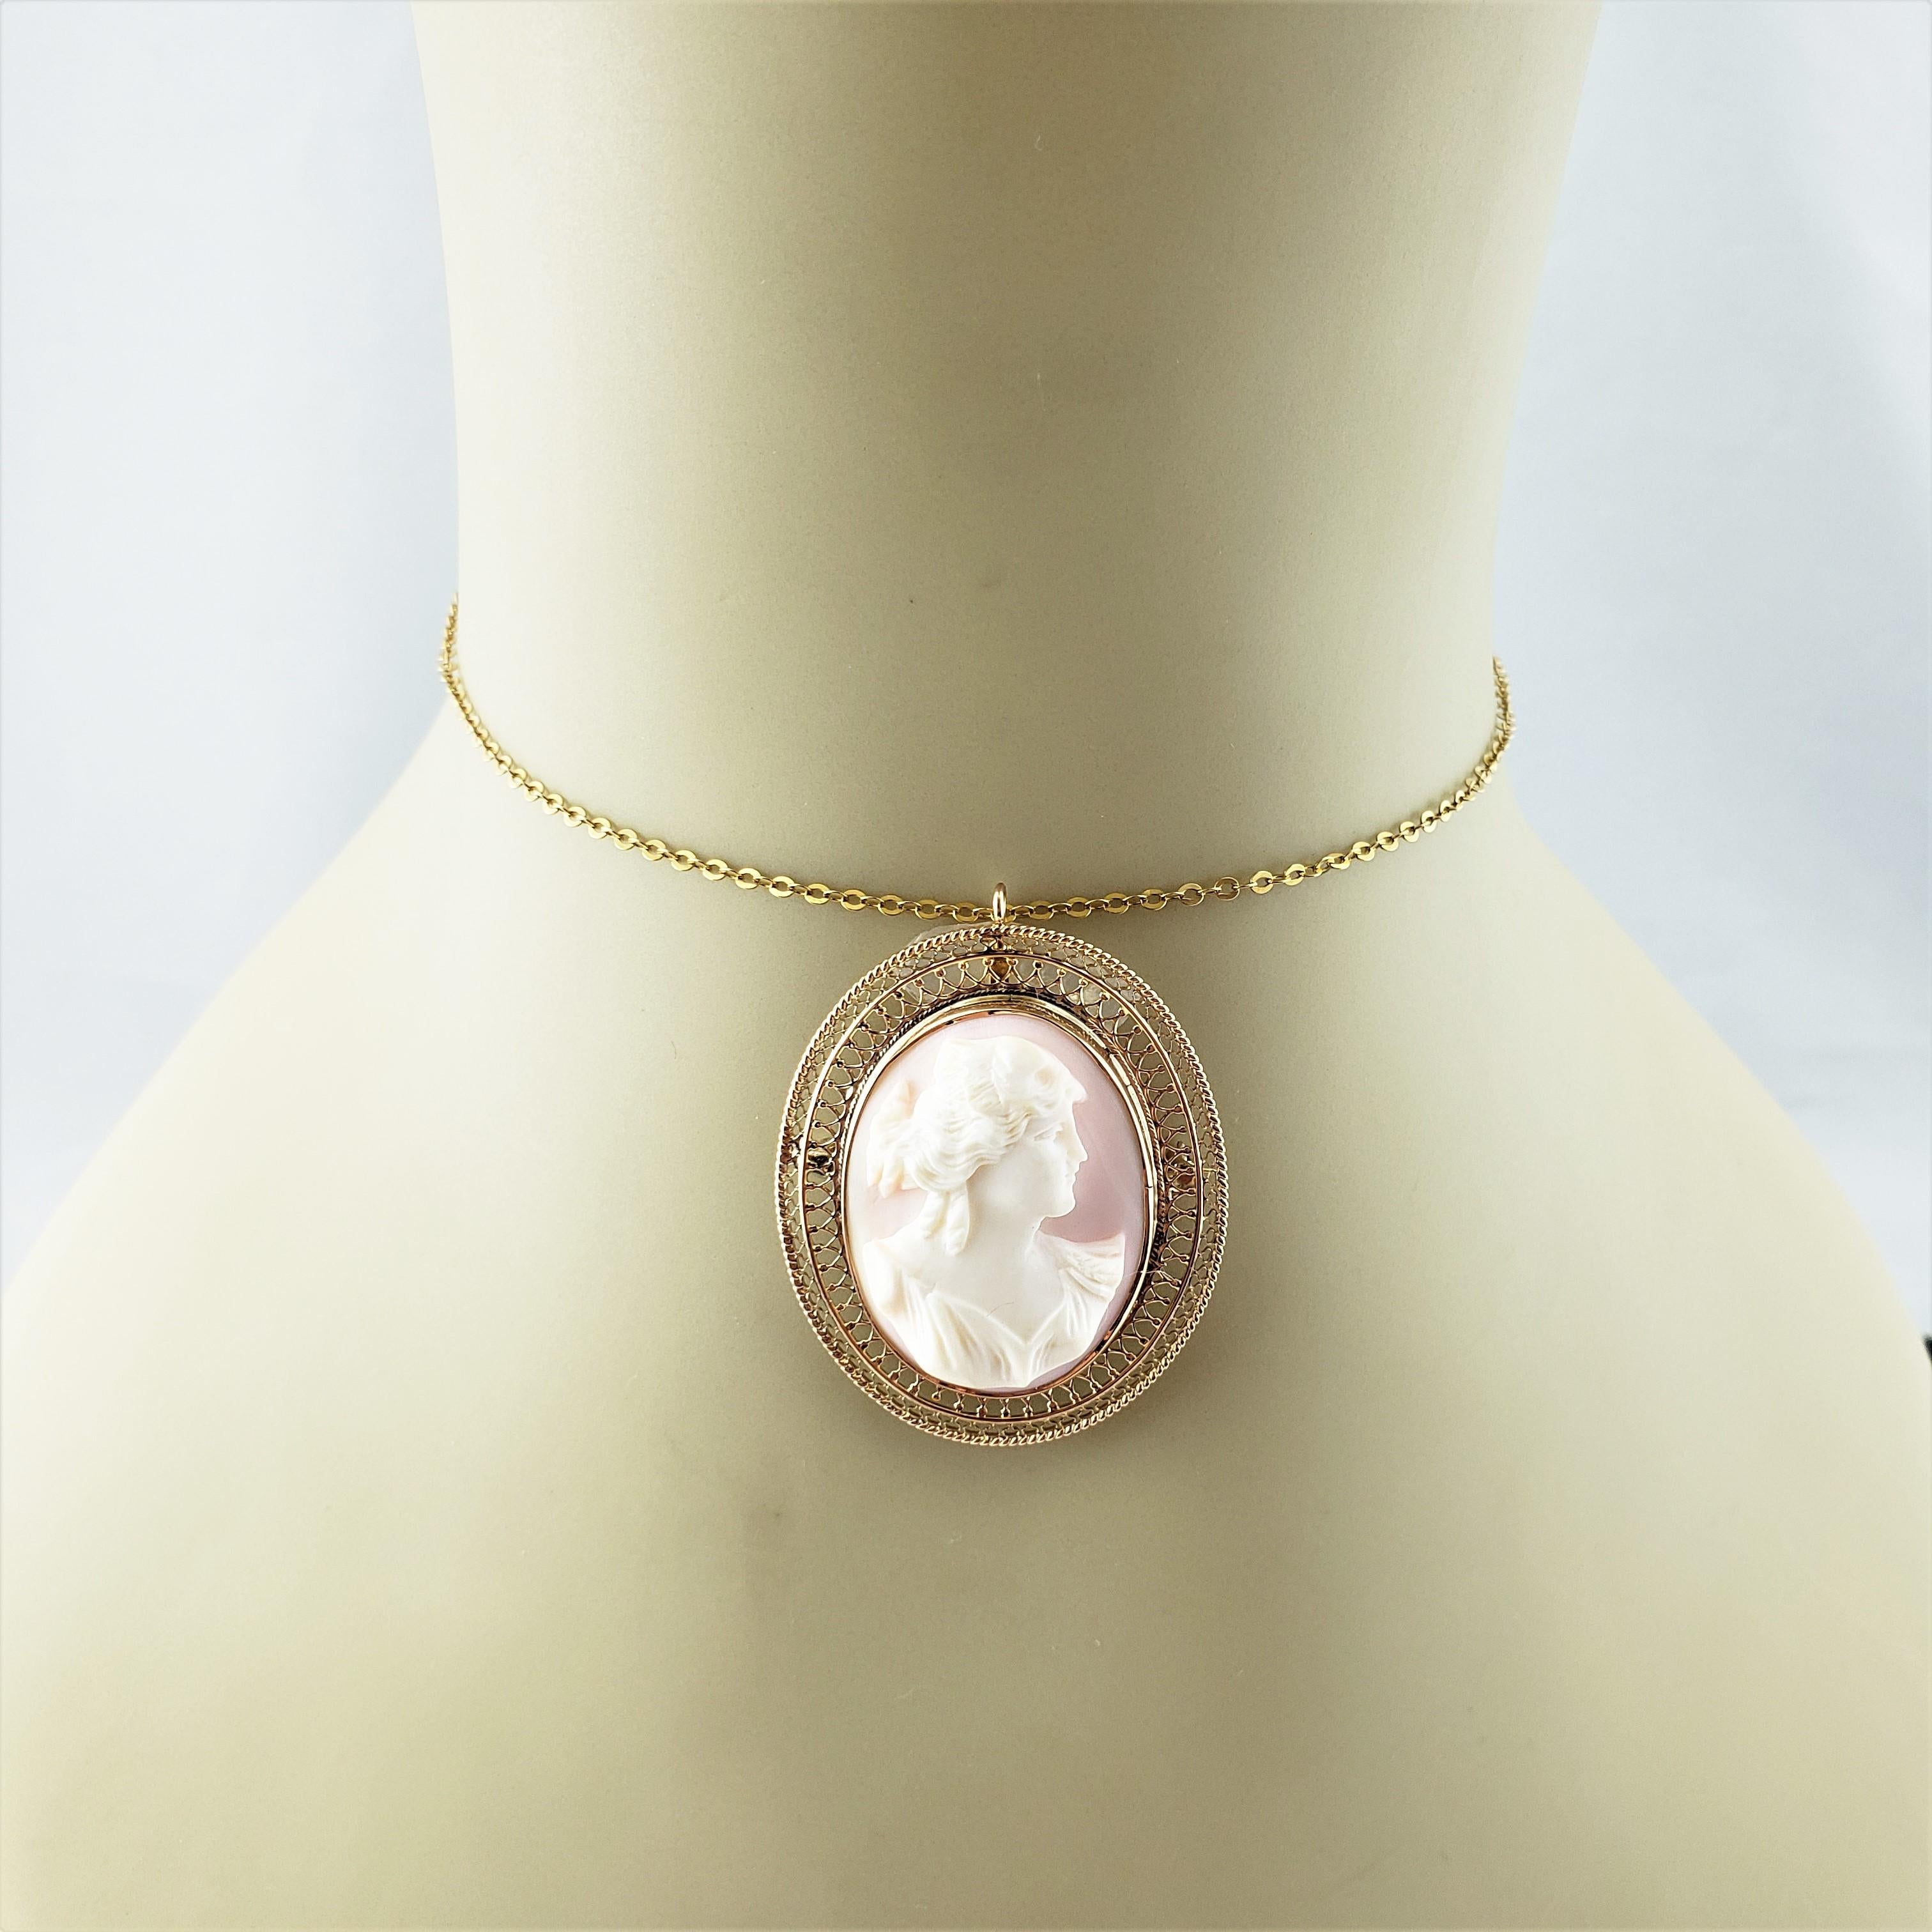 10 Karat Yellow Gold Pink Cameo Brooch/Pendant For Sale 2